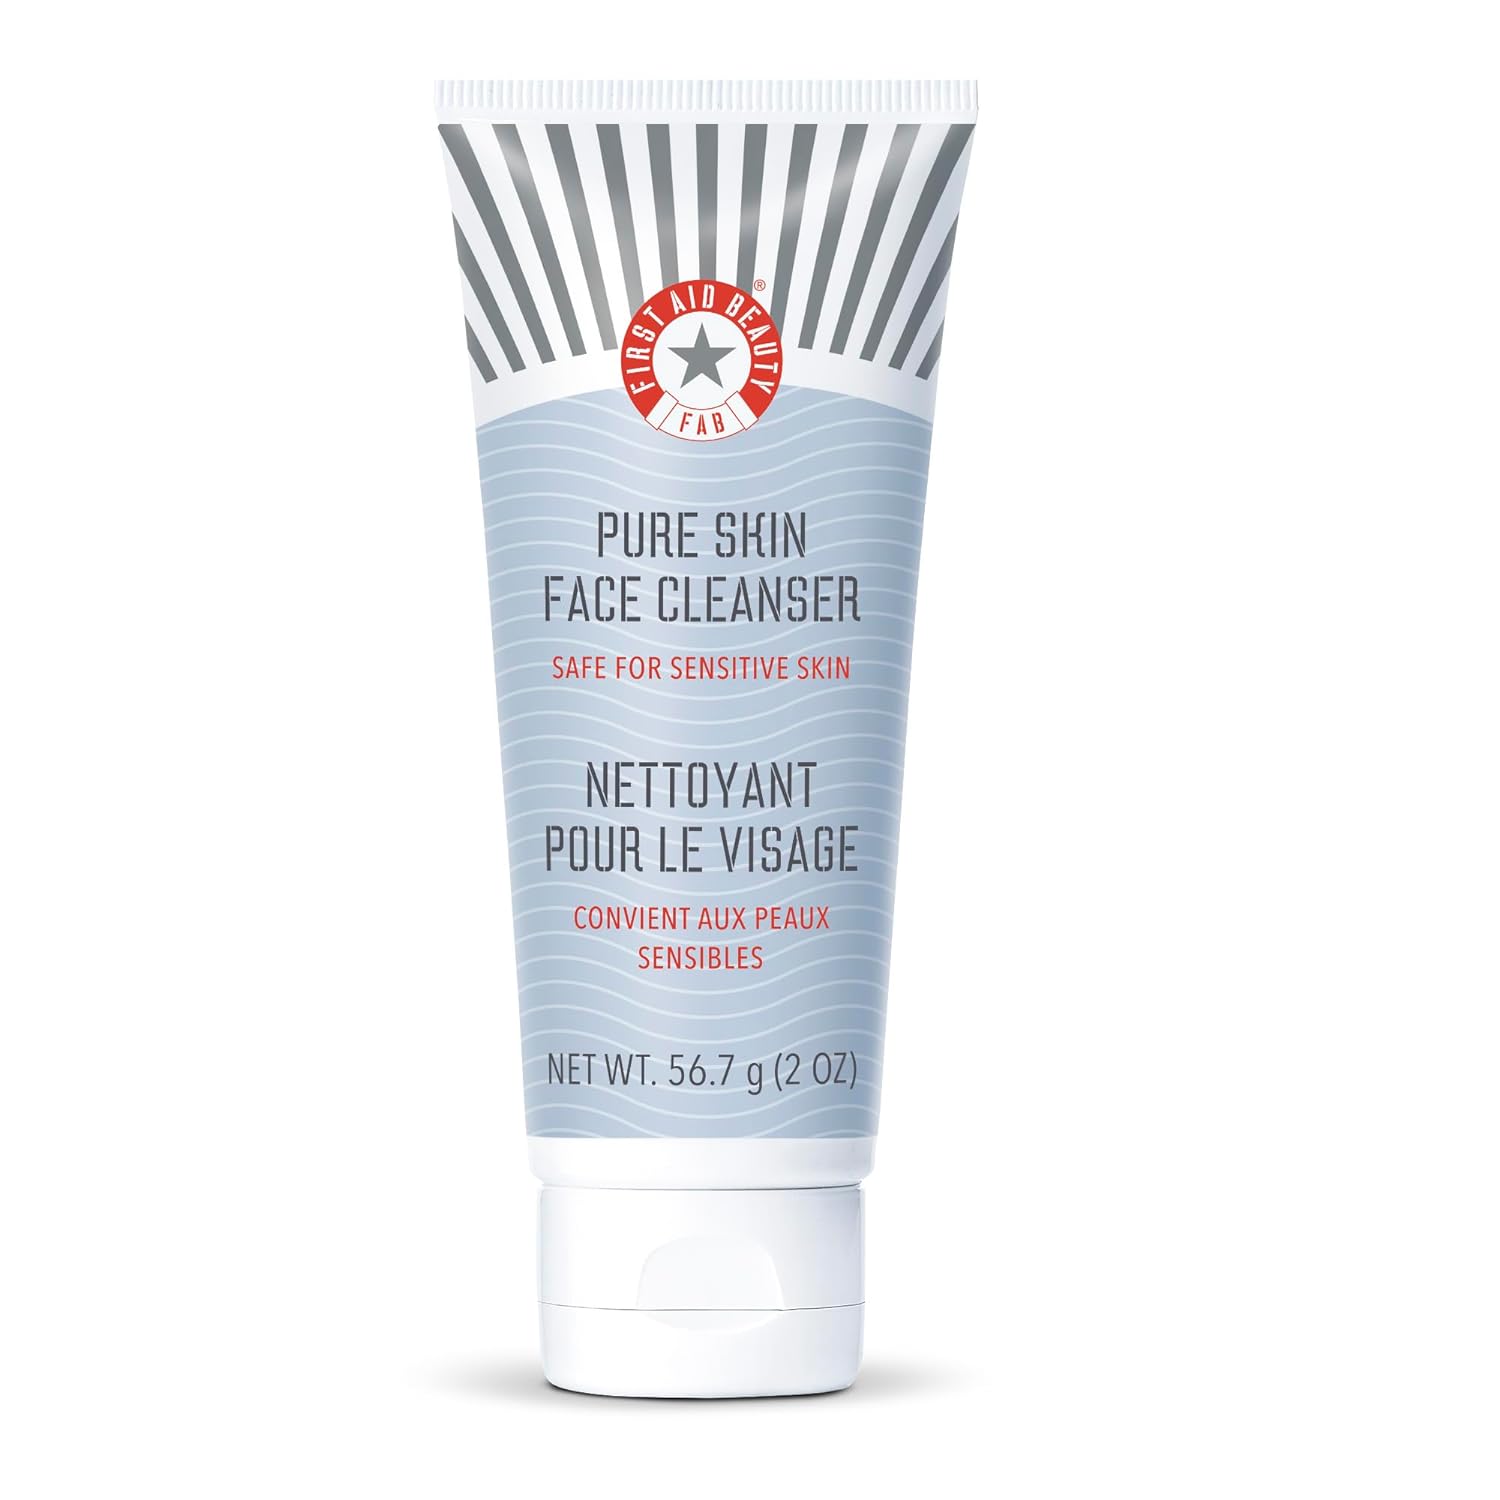 First Aid Beauty Pure Skin Face Cleanser, Sensitive Skin Cream Cleanser with Antioxidant Booster, Travel Size, 2 oz